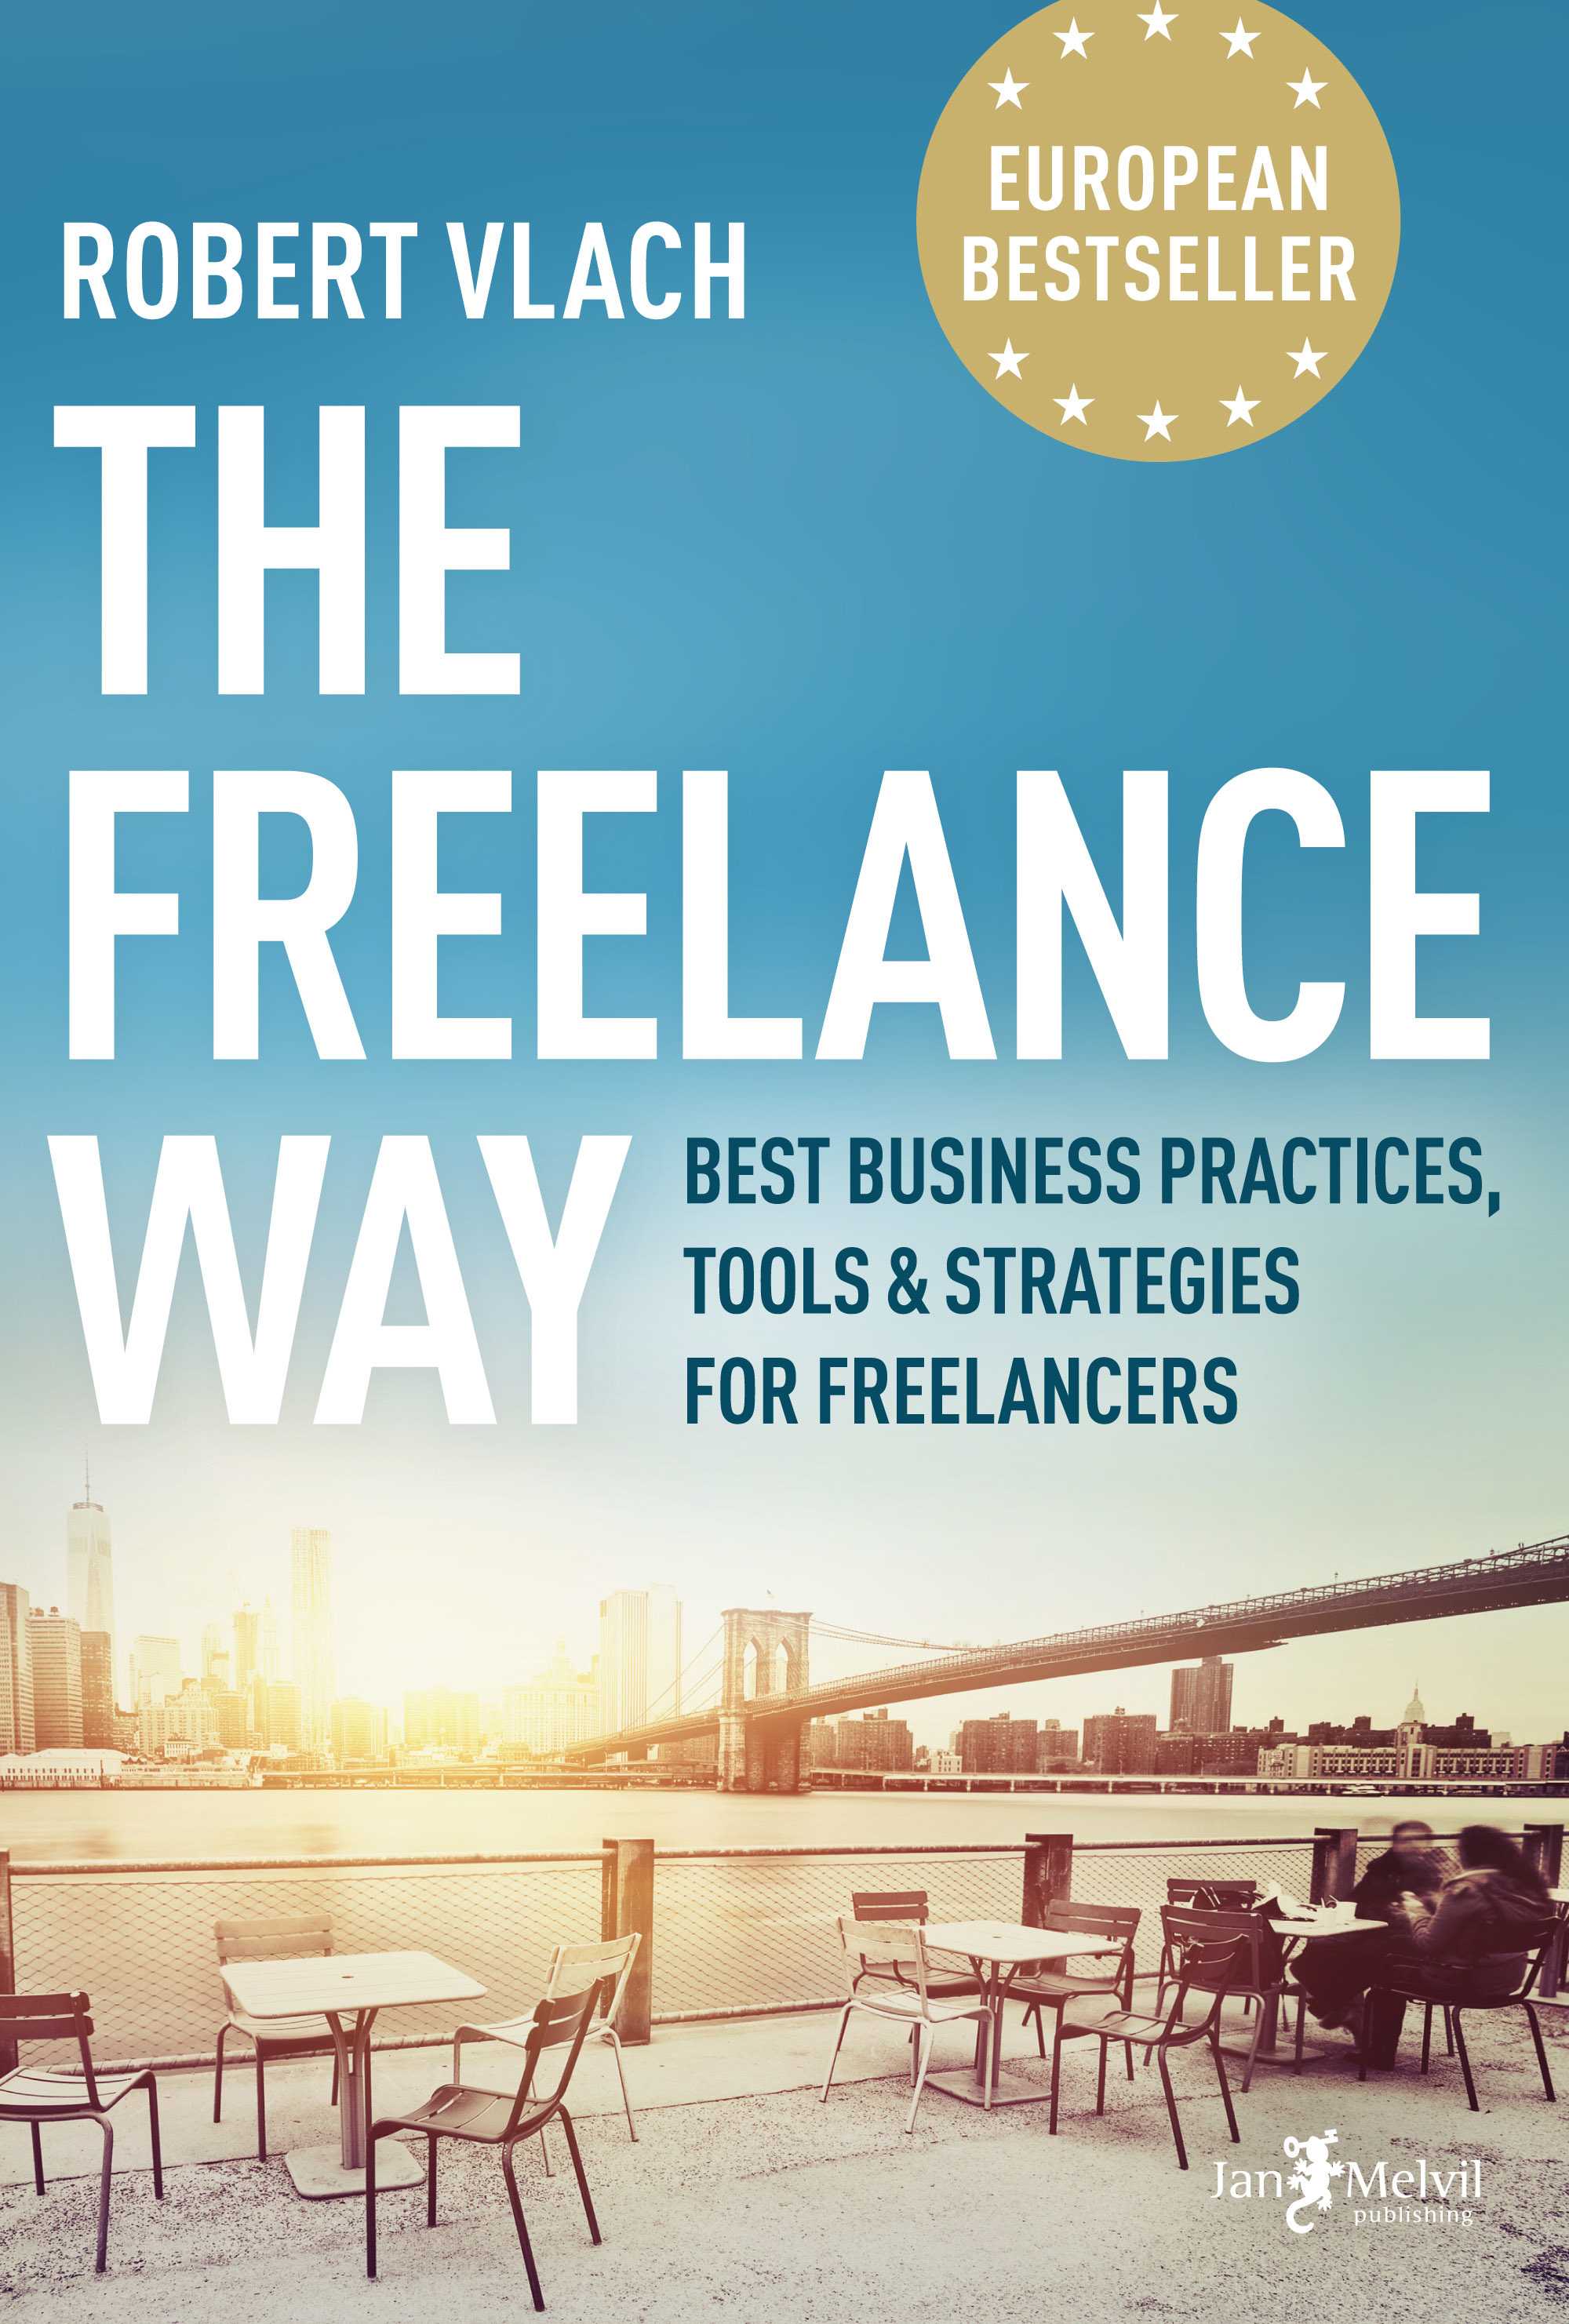 The Freelance Way: Best Business Practices, Tools & Strategies for Freelancers